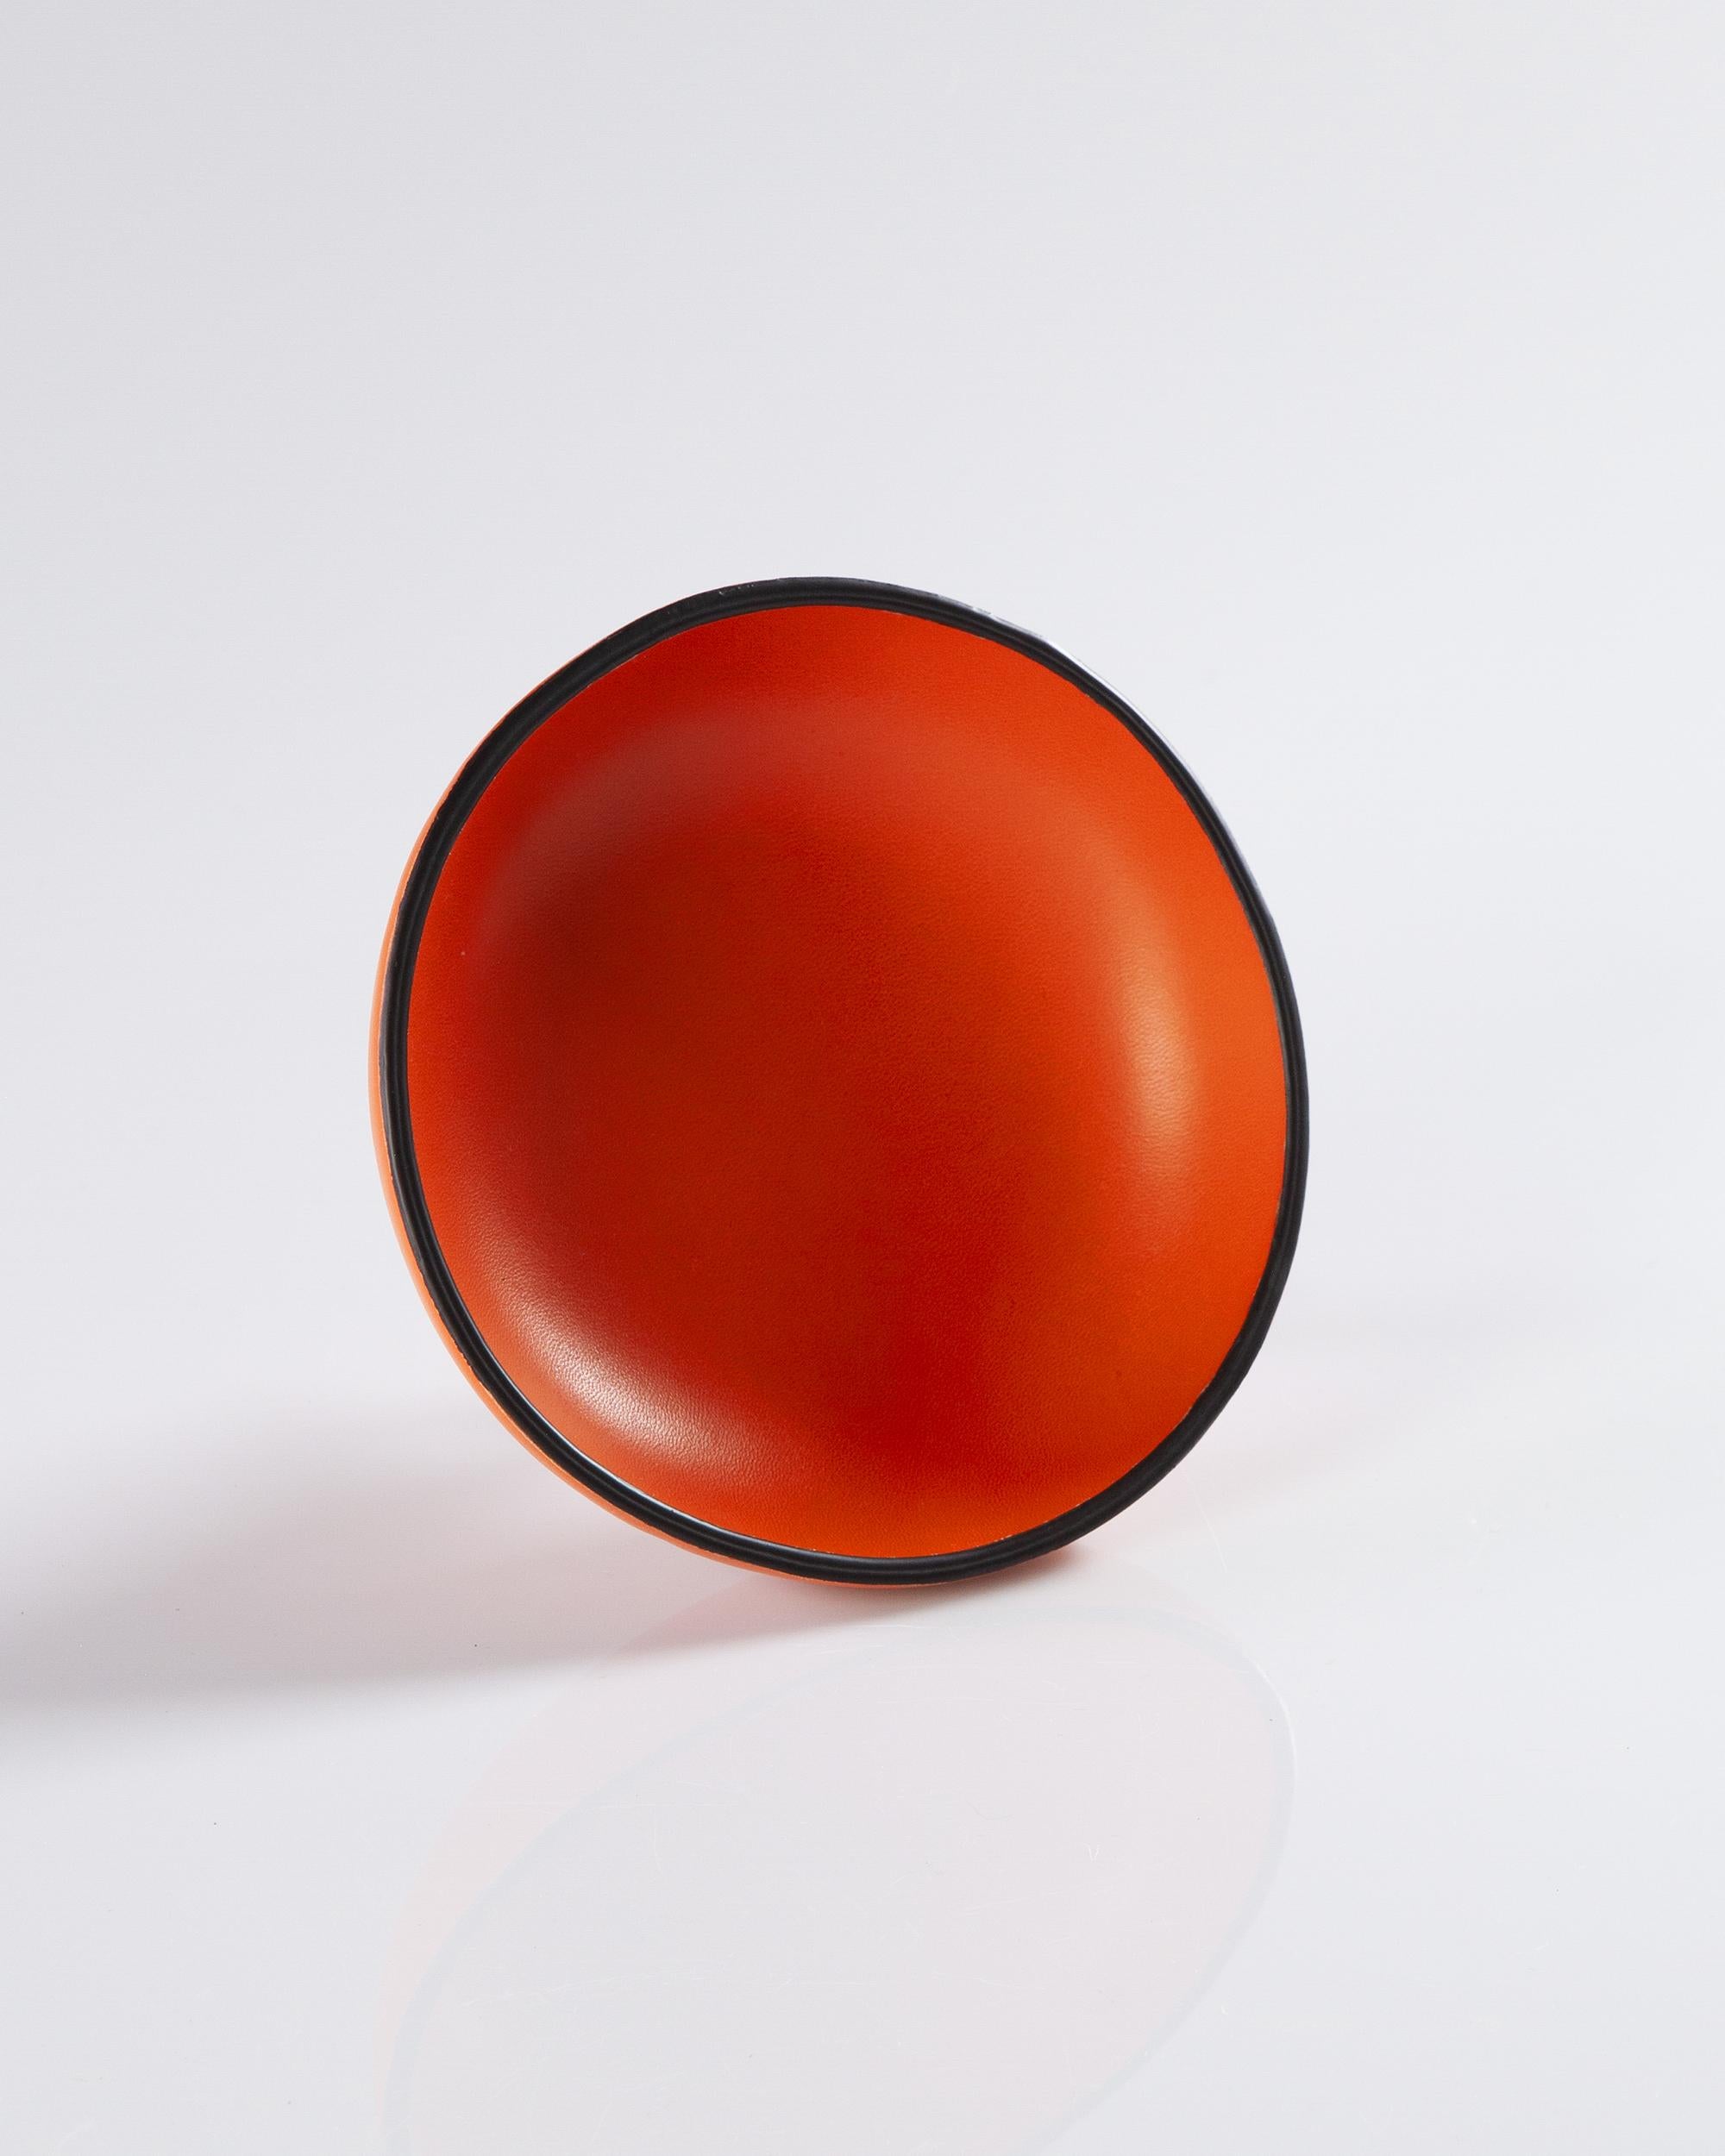 Handmade Luxury Leather Bowl in Sunset Orange and Black In New Condition For Sale In West Hollywood, CA